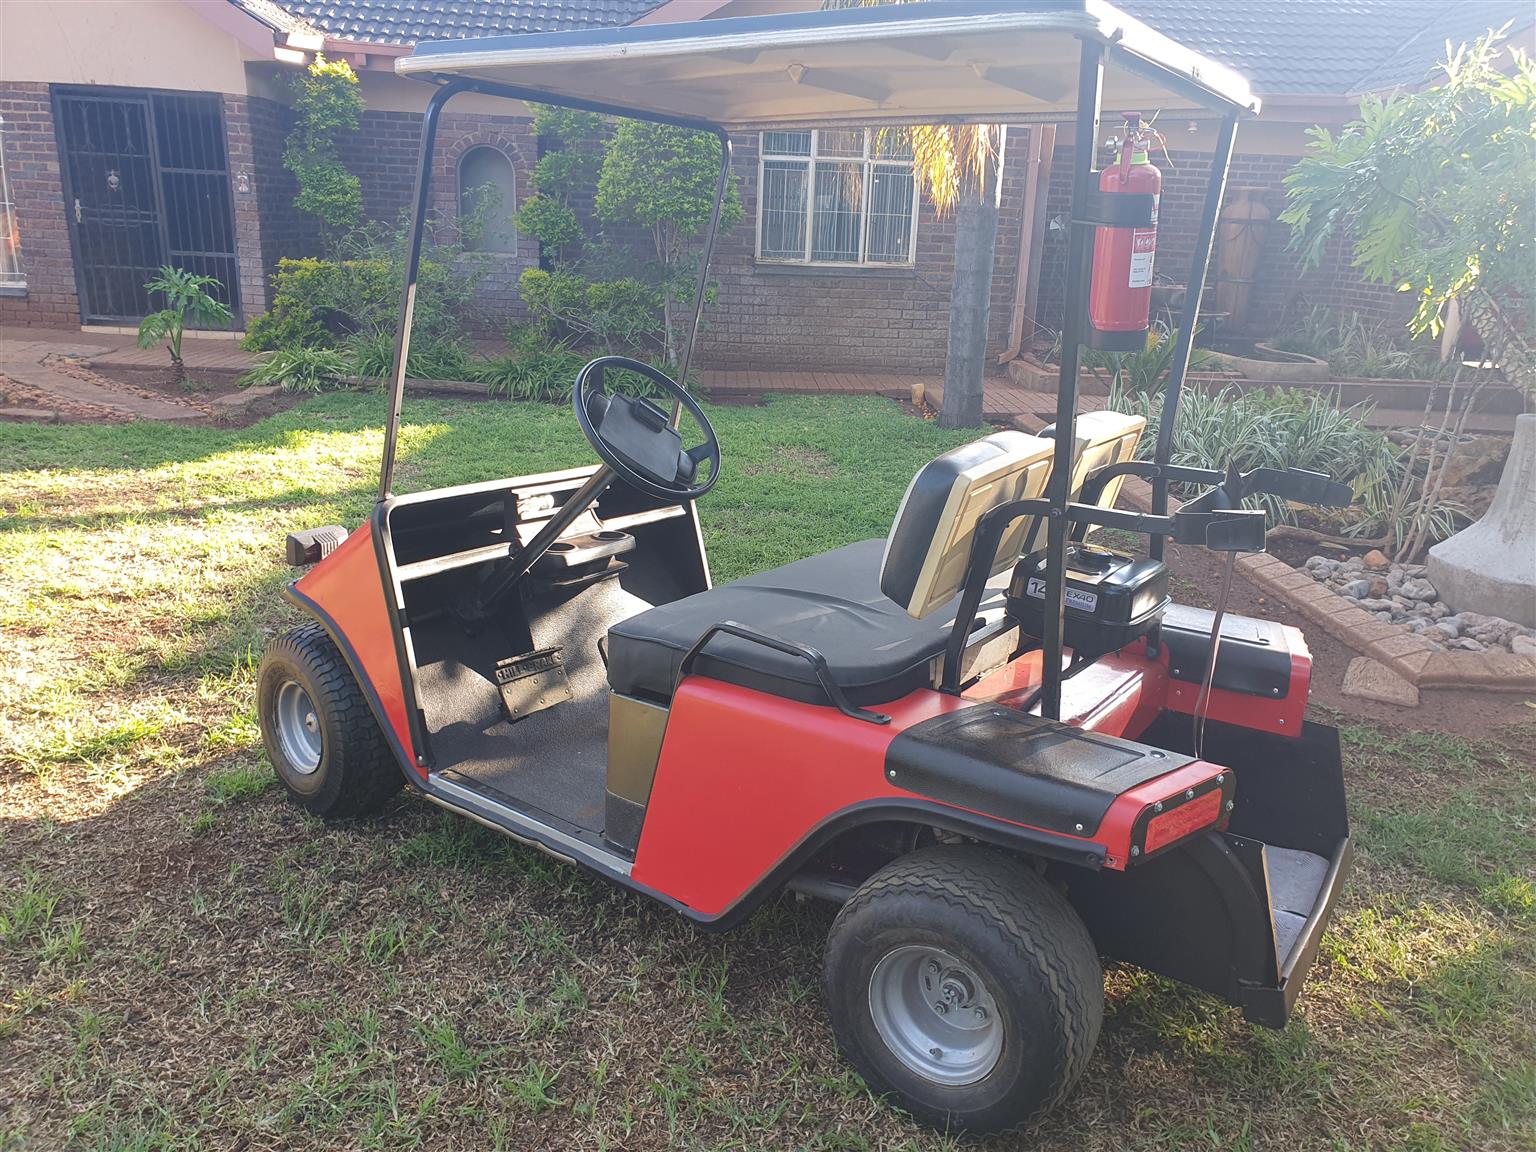 Ezgo 4stroke petrol golf cart for sale. Brand new engine, clutch and battery.